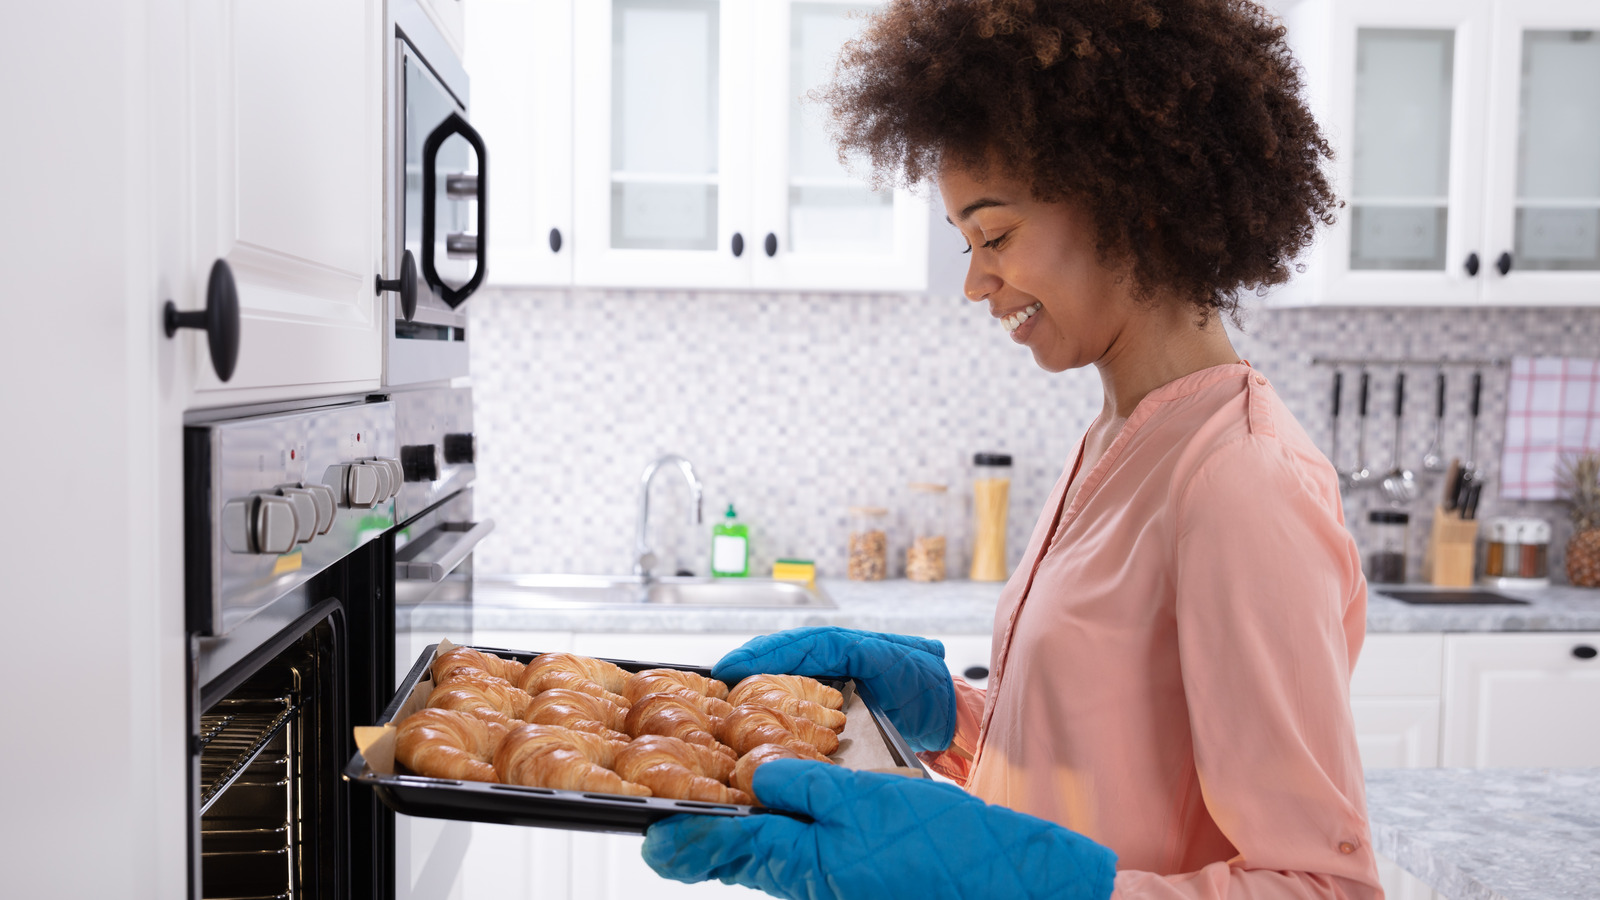 You Should Never Use Wet Oven Mitts. Here's Why